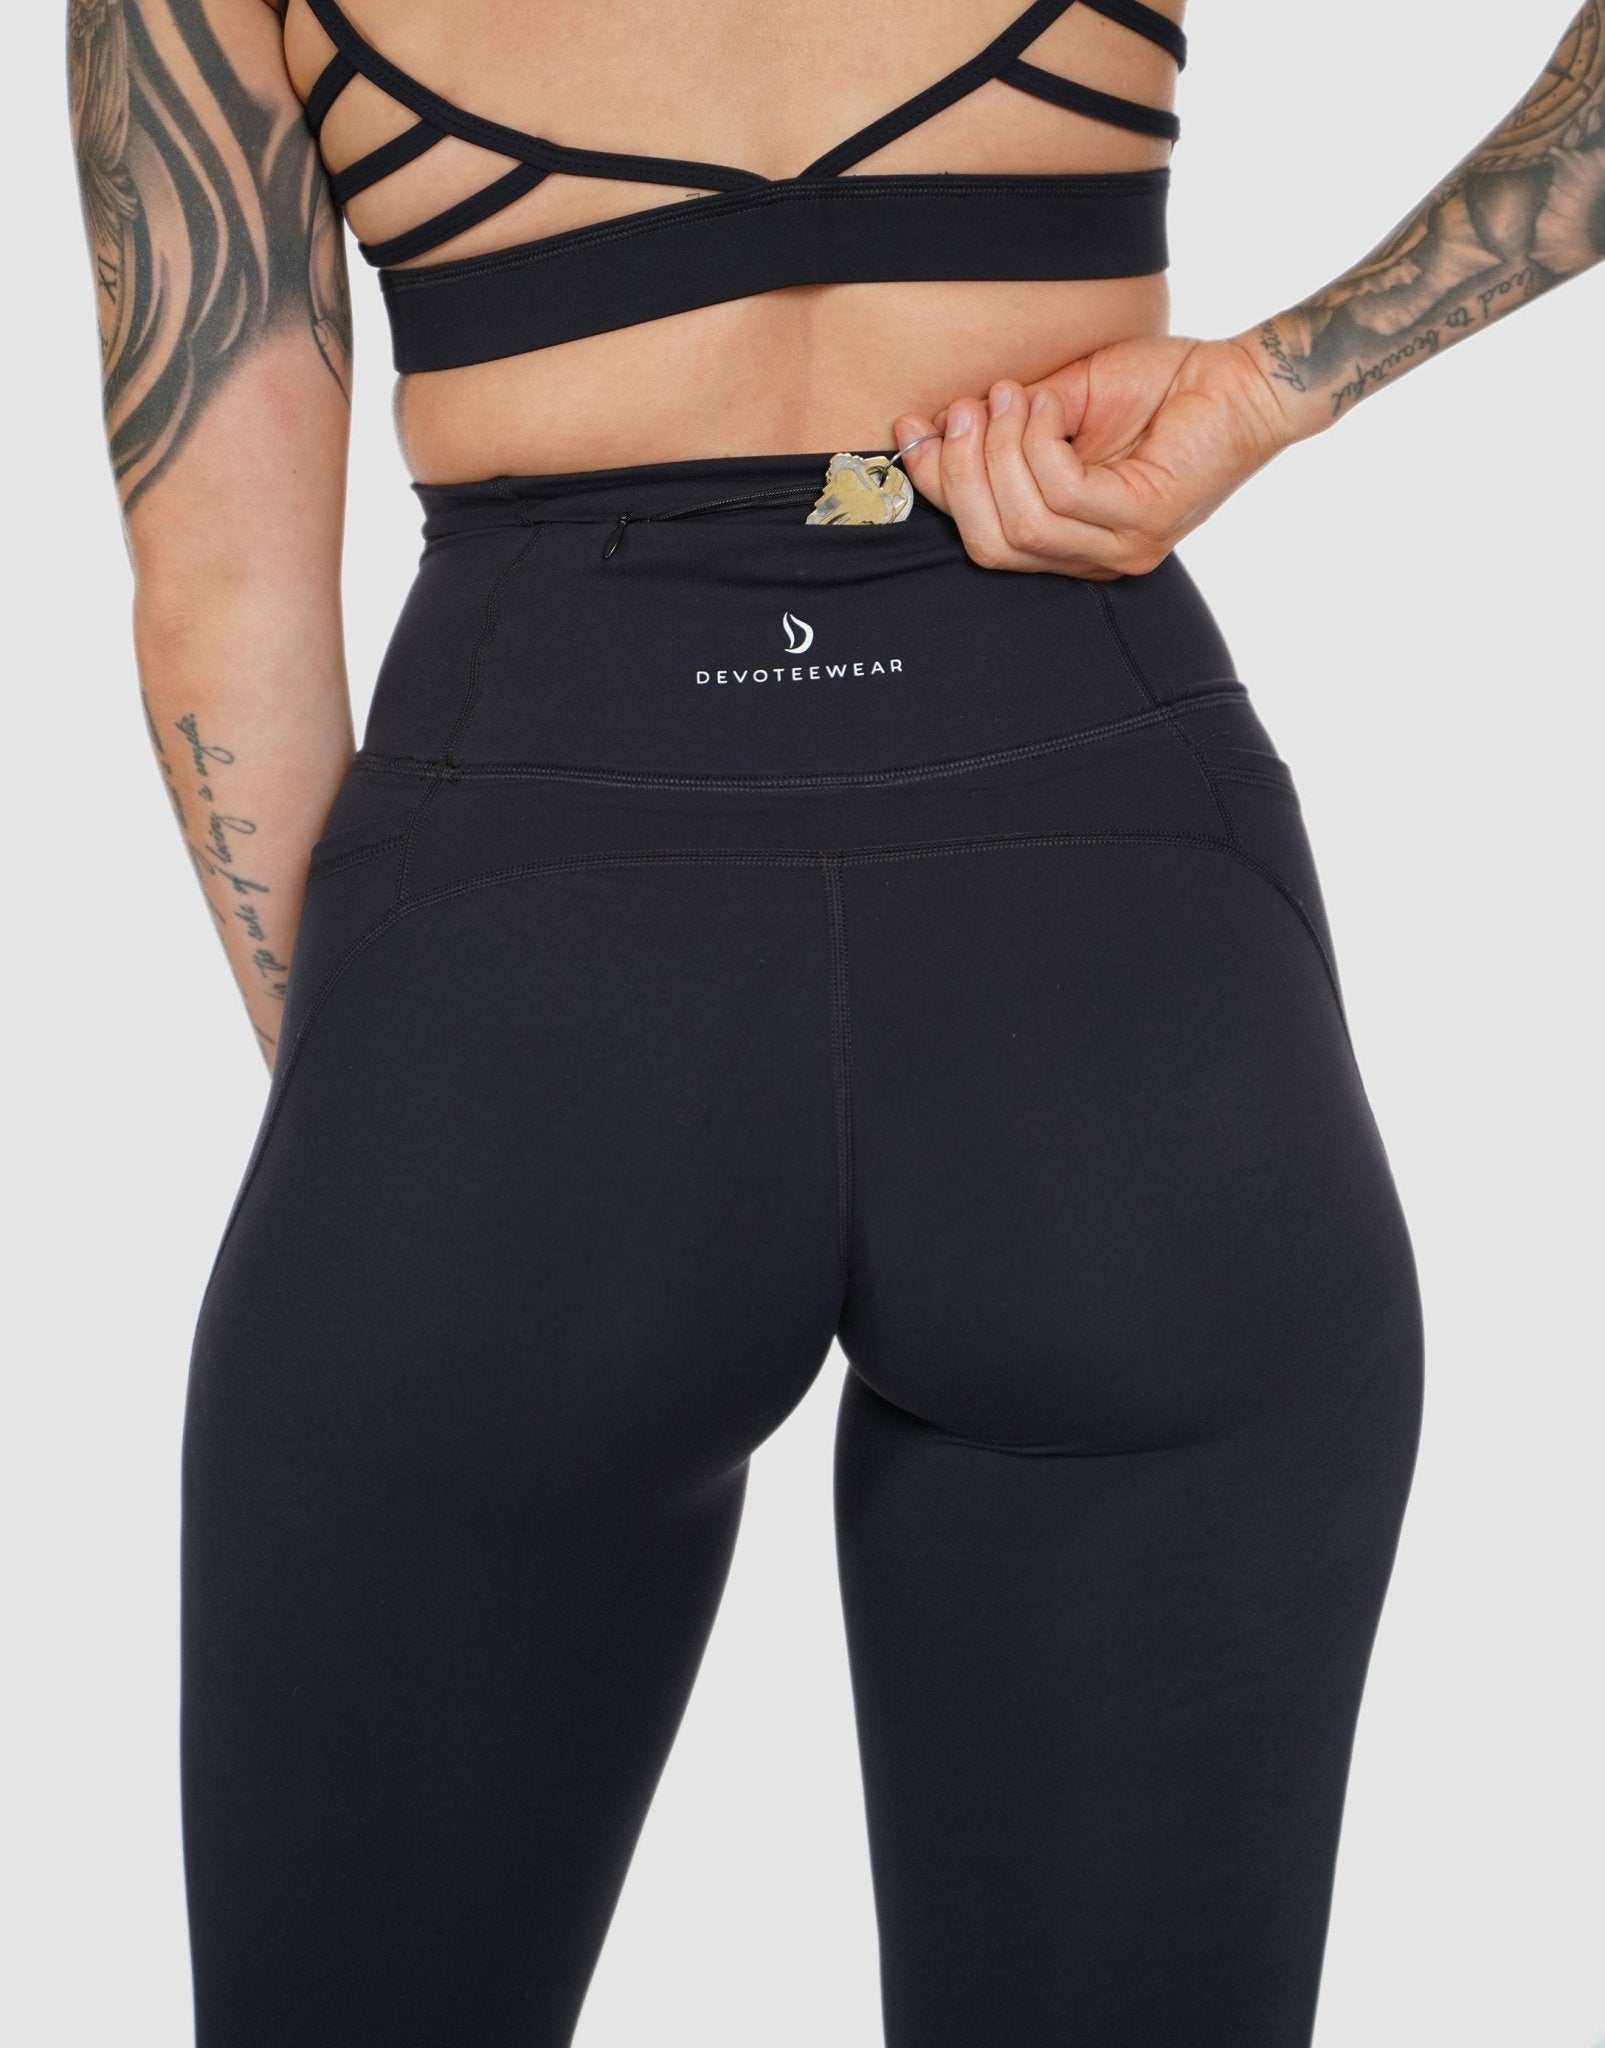 👀Everything you need is just in pocket!⁠ ⁠ Stay free and focused with our  Body Sculpt Side Pocket Leggings via the link in our bio